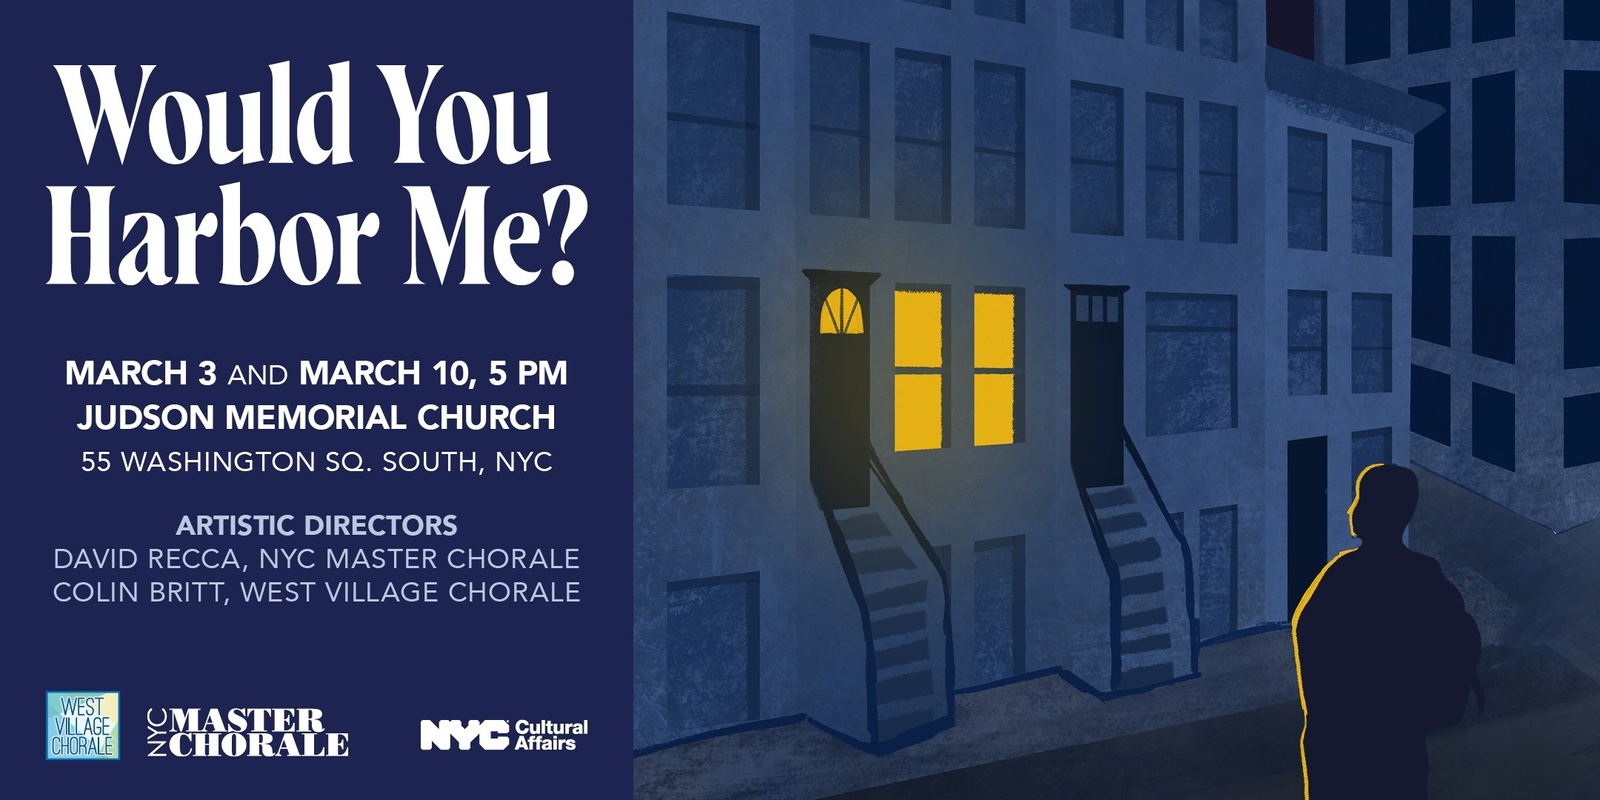 Banner image for "Would You Harbor Me?" - a joint concert by the West Village Chorale and the NYC Master Chorale